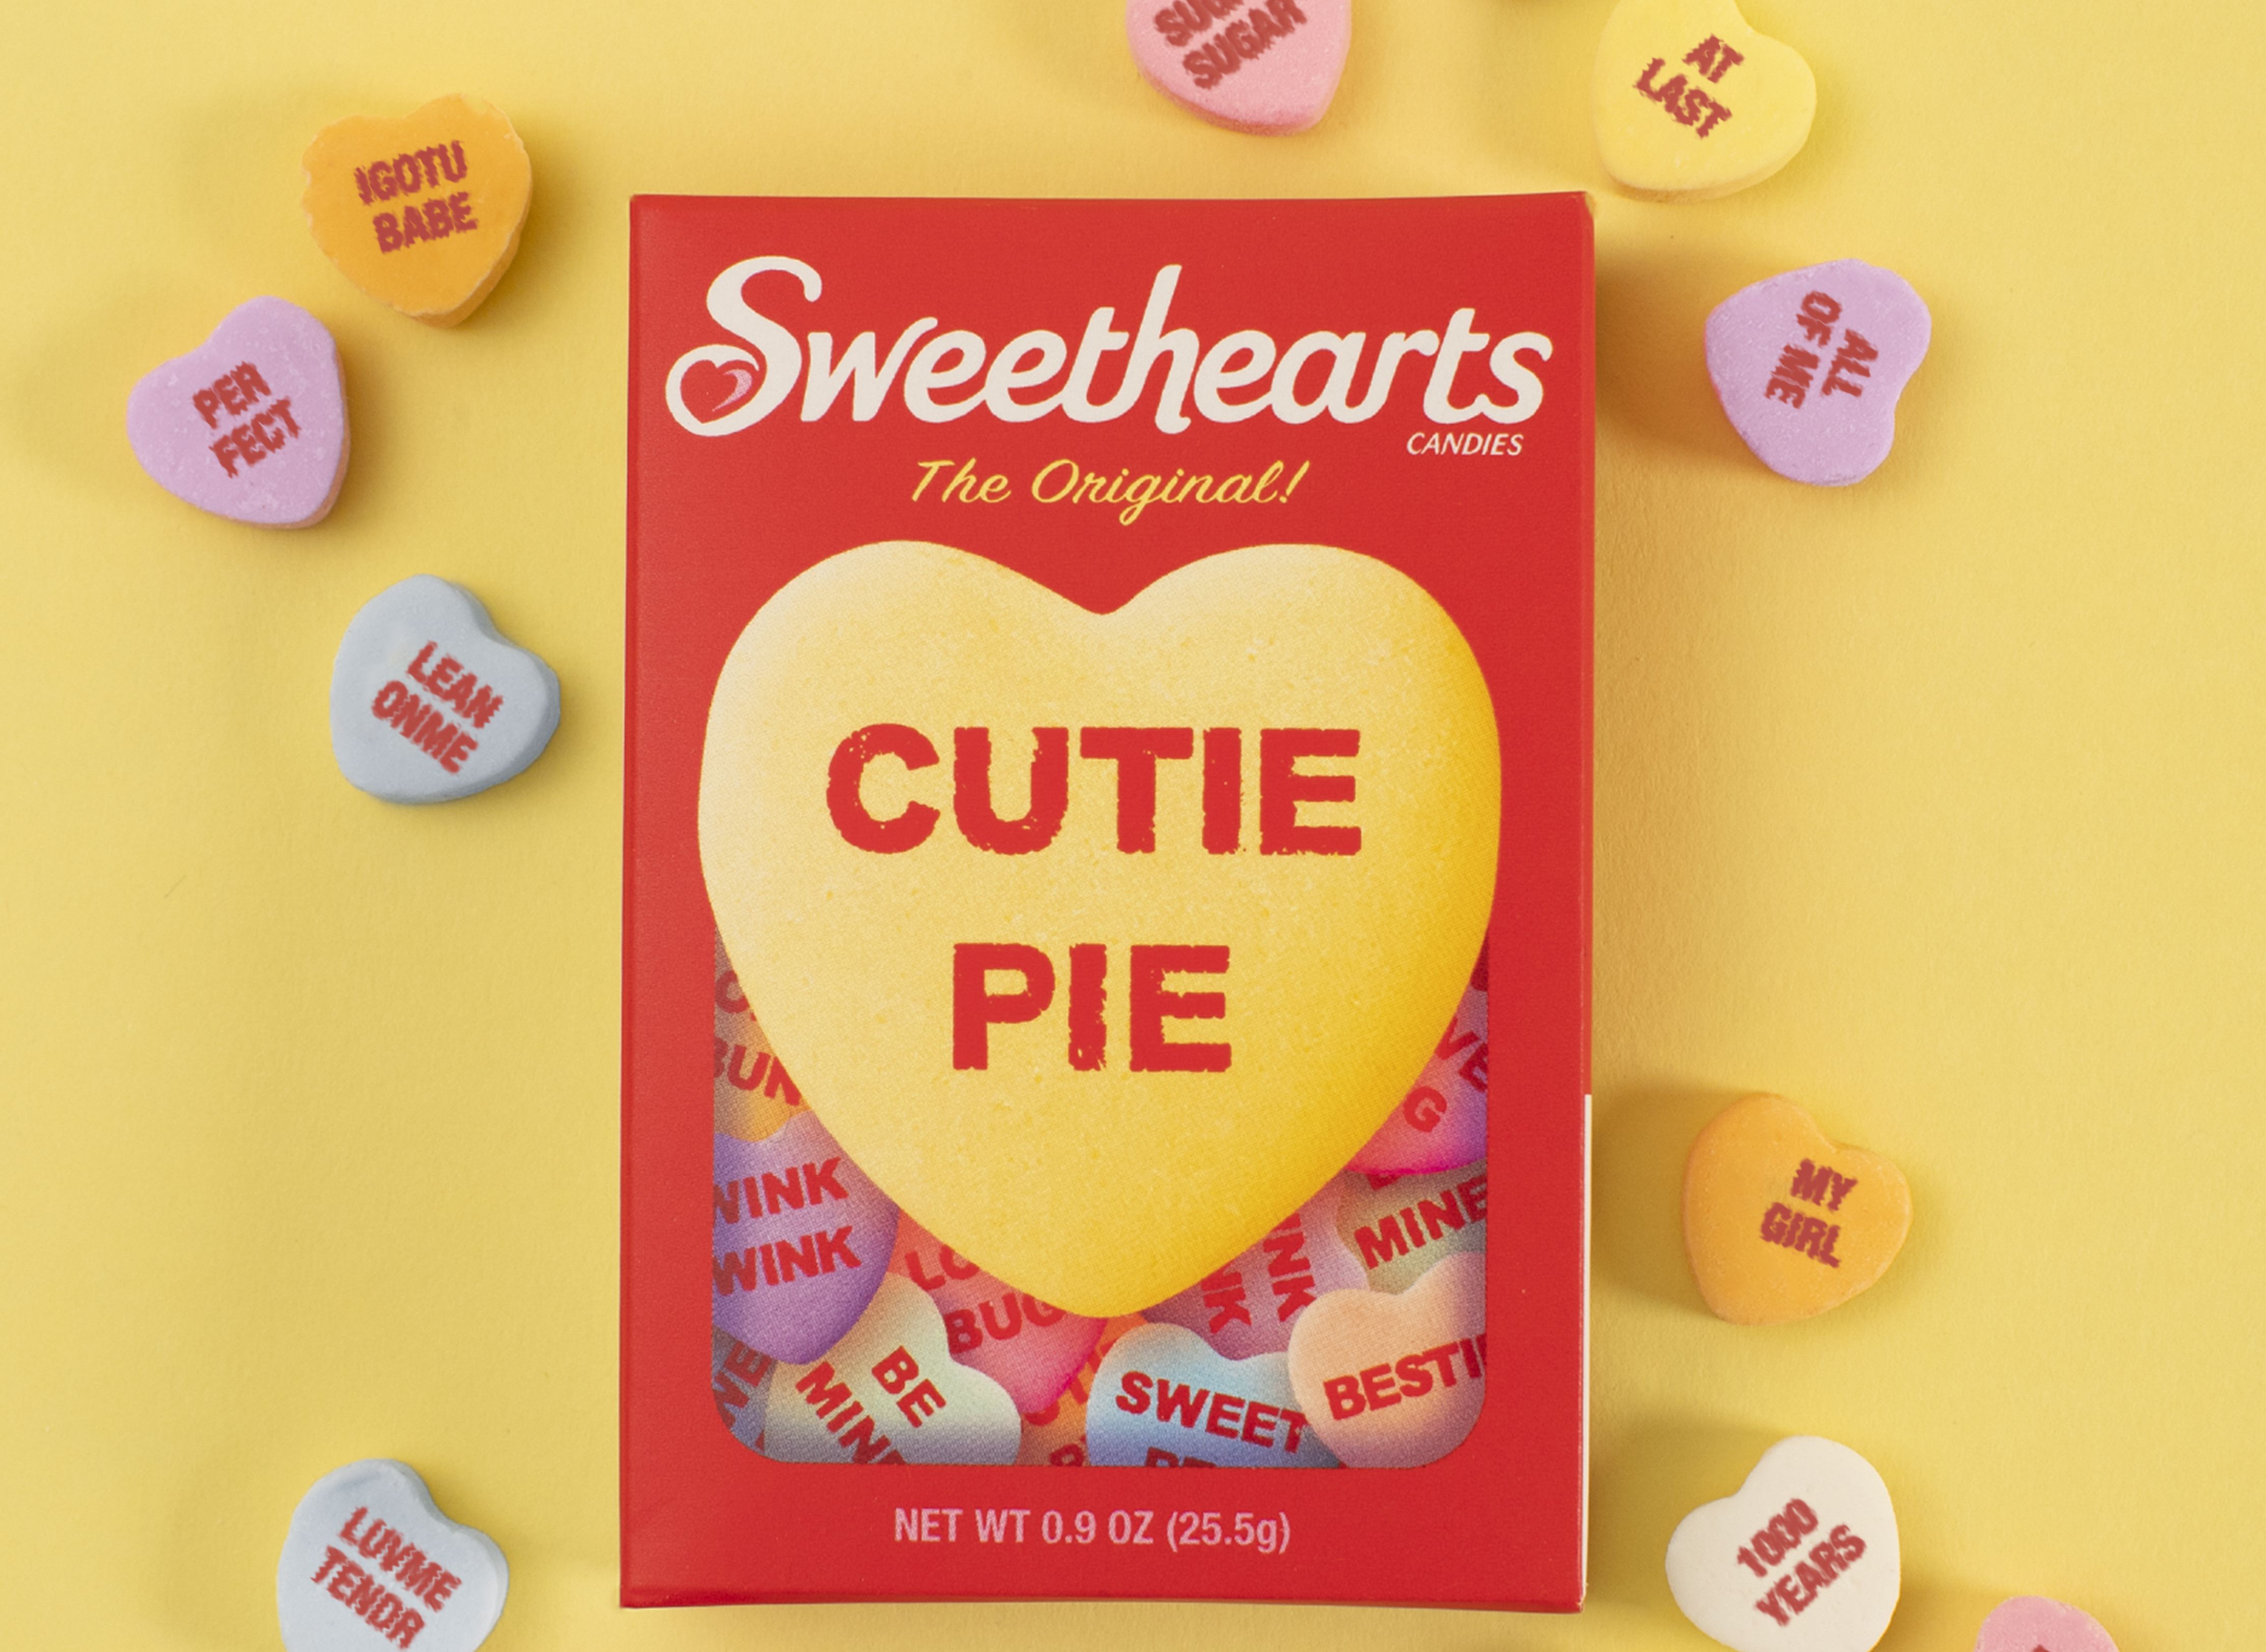 Sweethearts: Necco Explains the Phrases on the Candy Hearts - TIME